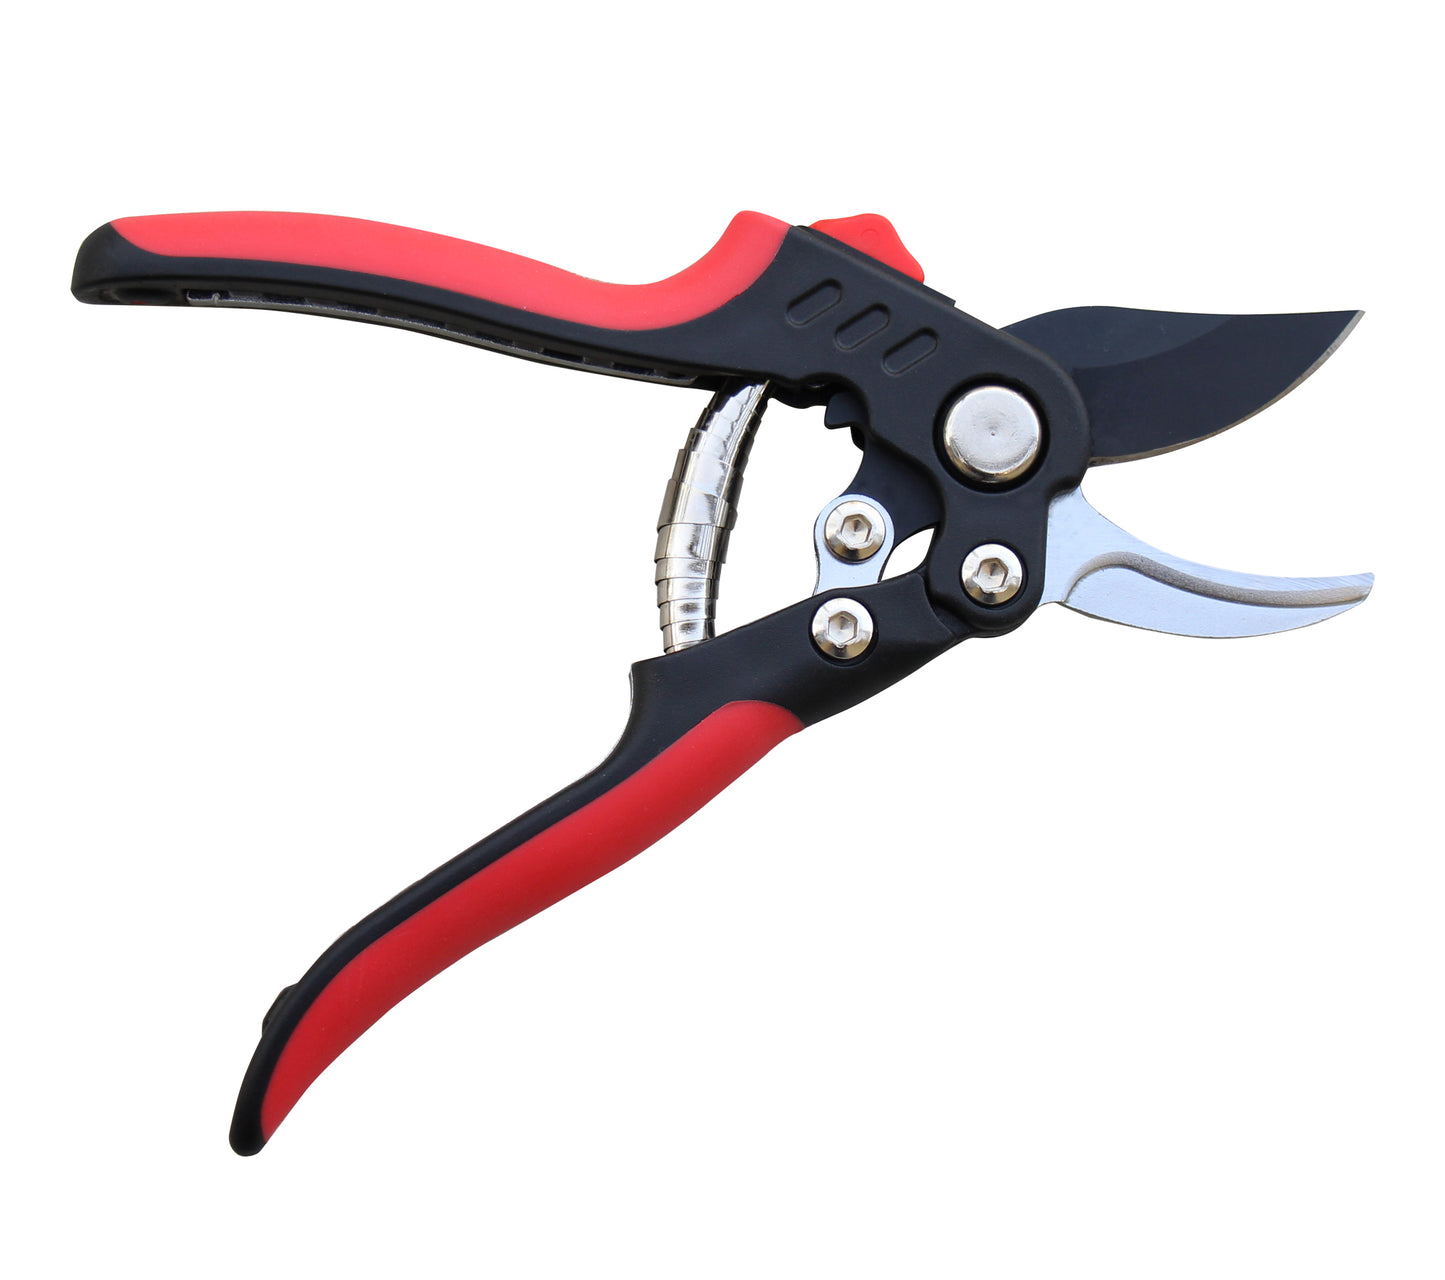 TABOR TOOLS S851A Bypass Hand Pruner with Compound Action